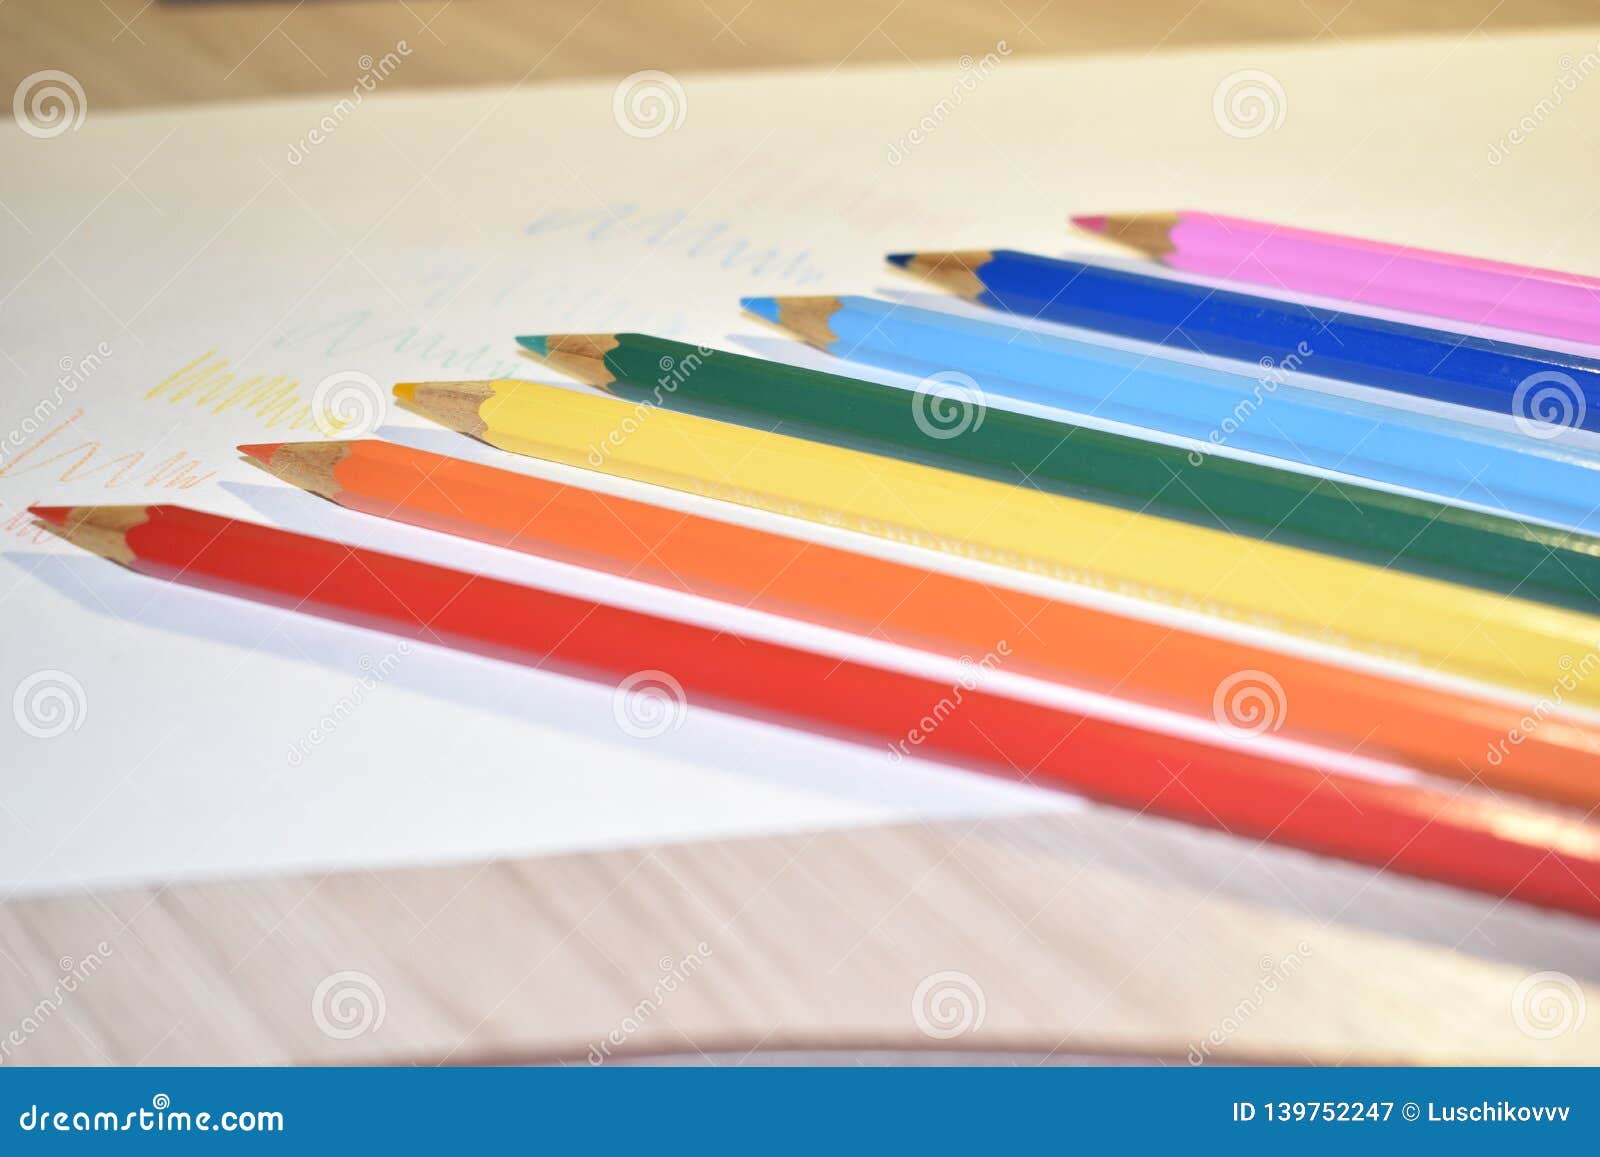 Colored Pencils On A Sheet Of White Paper Stock Image Image Of